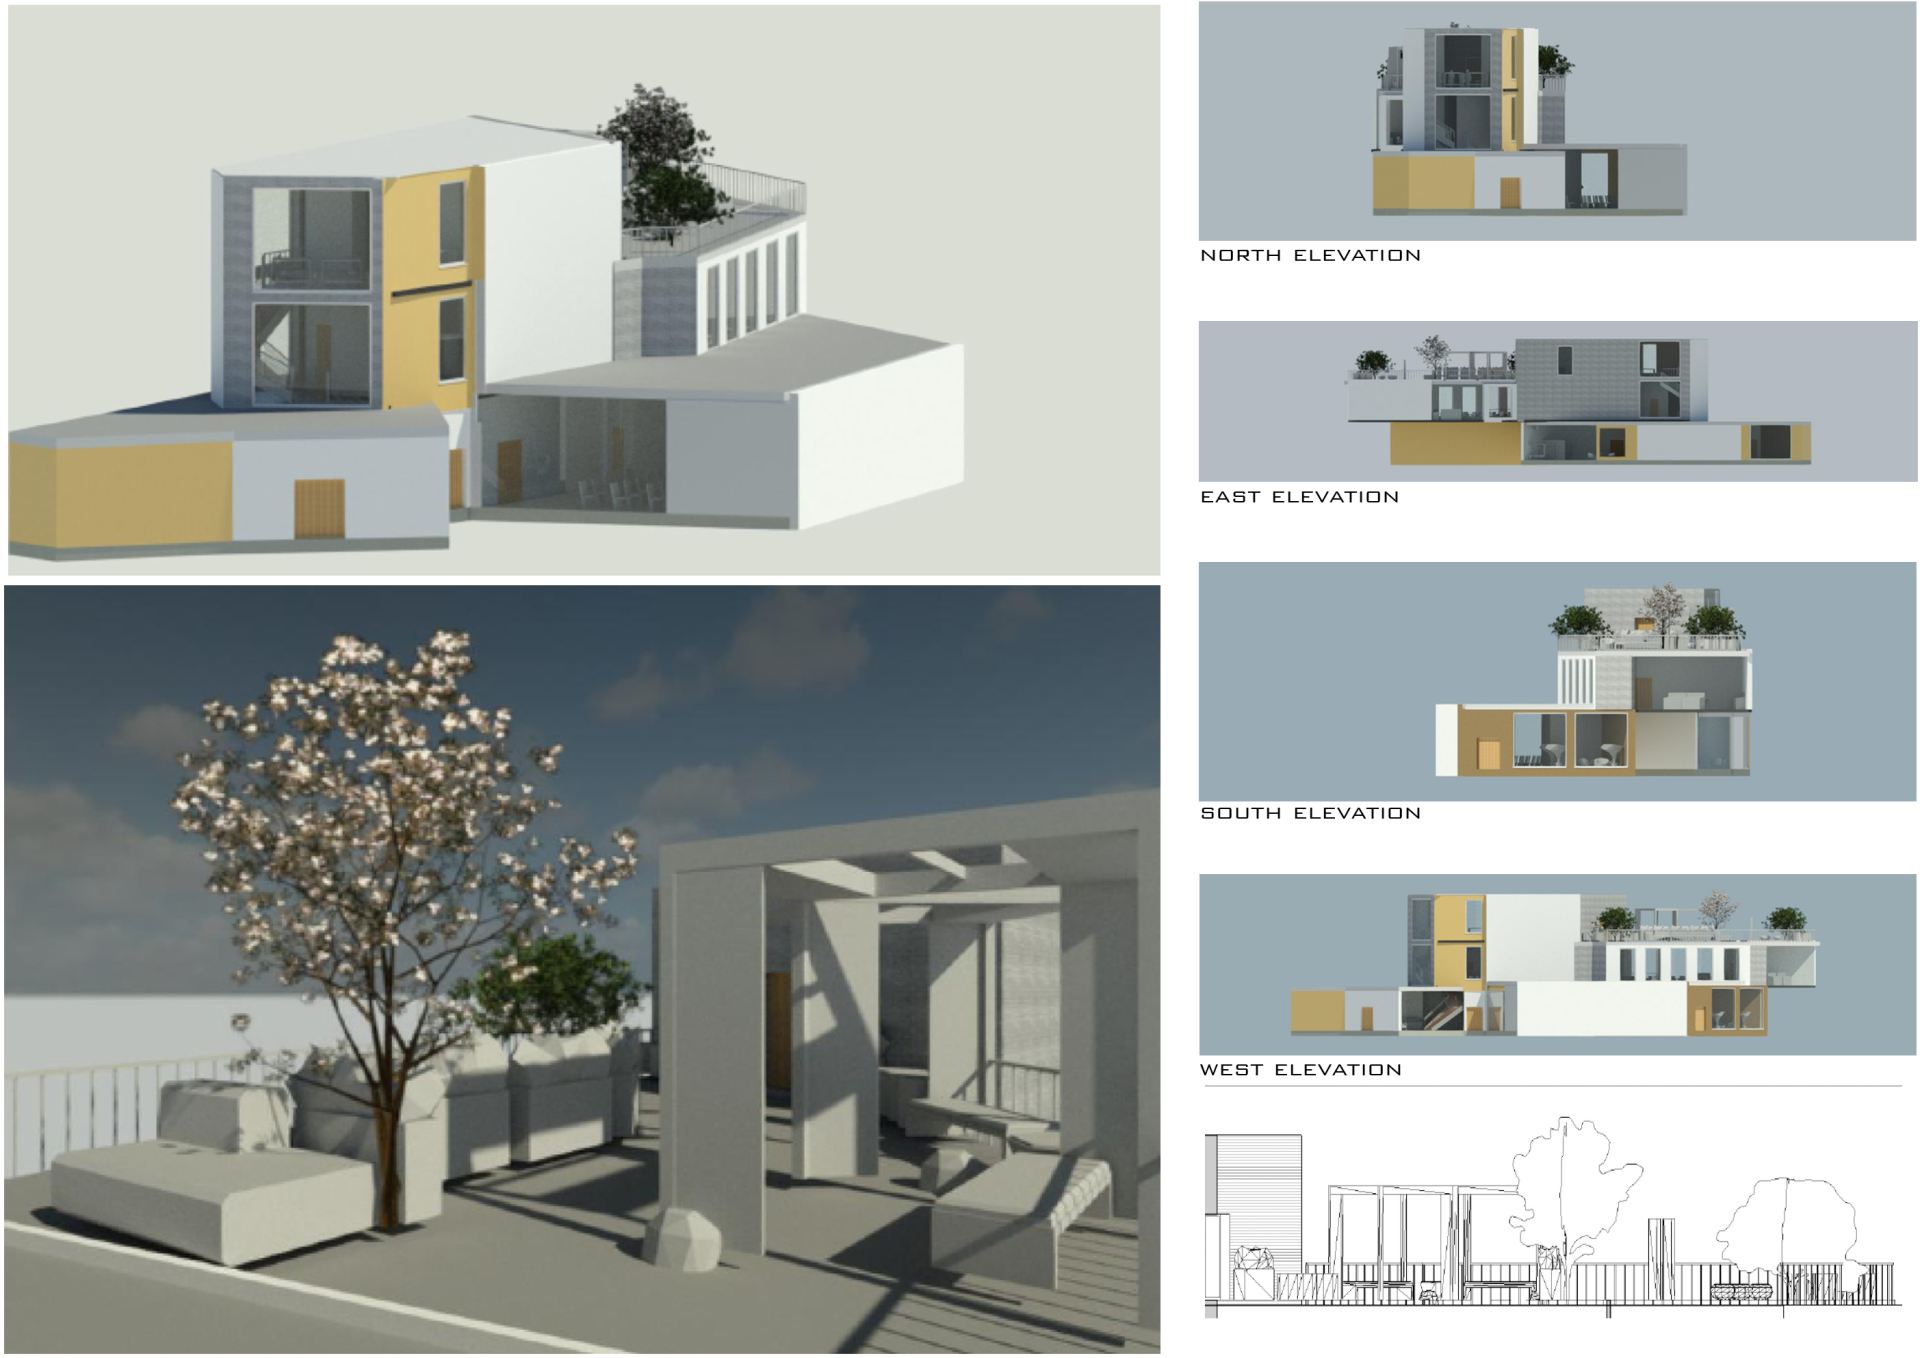 First year architecture project: Wellbeing centre designed for the University